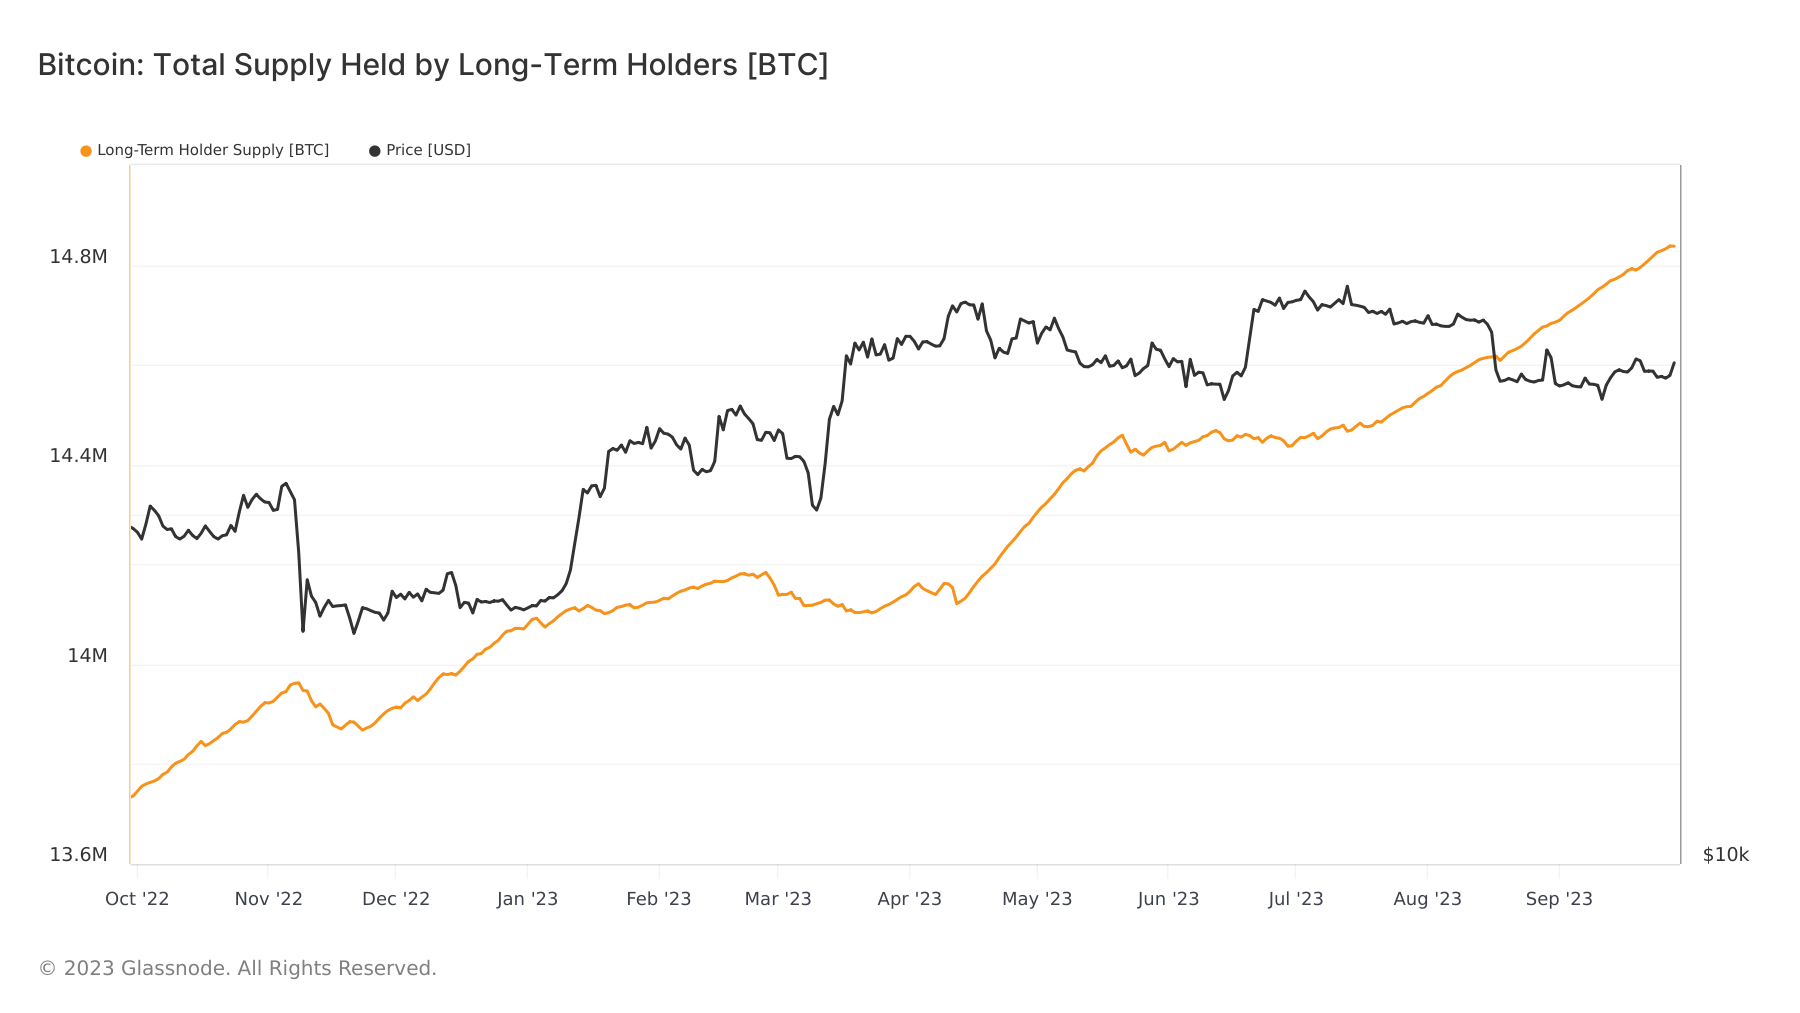 long-term holders supply 1 year